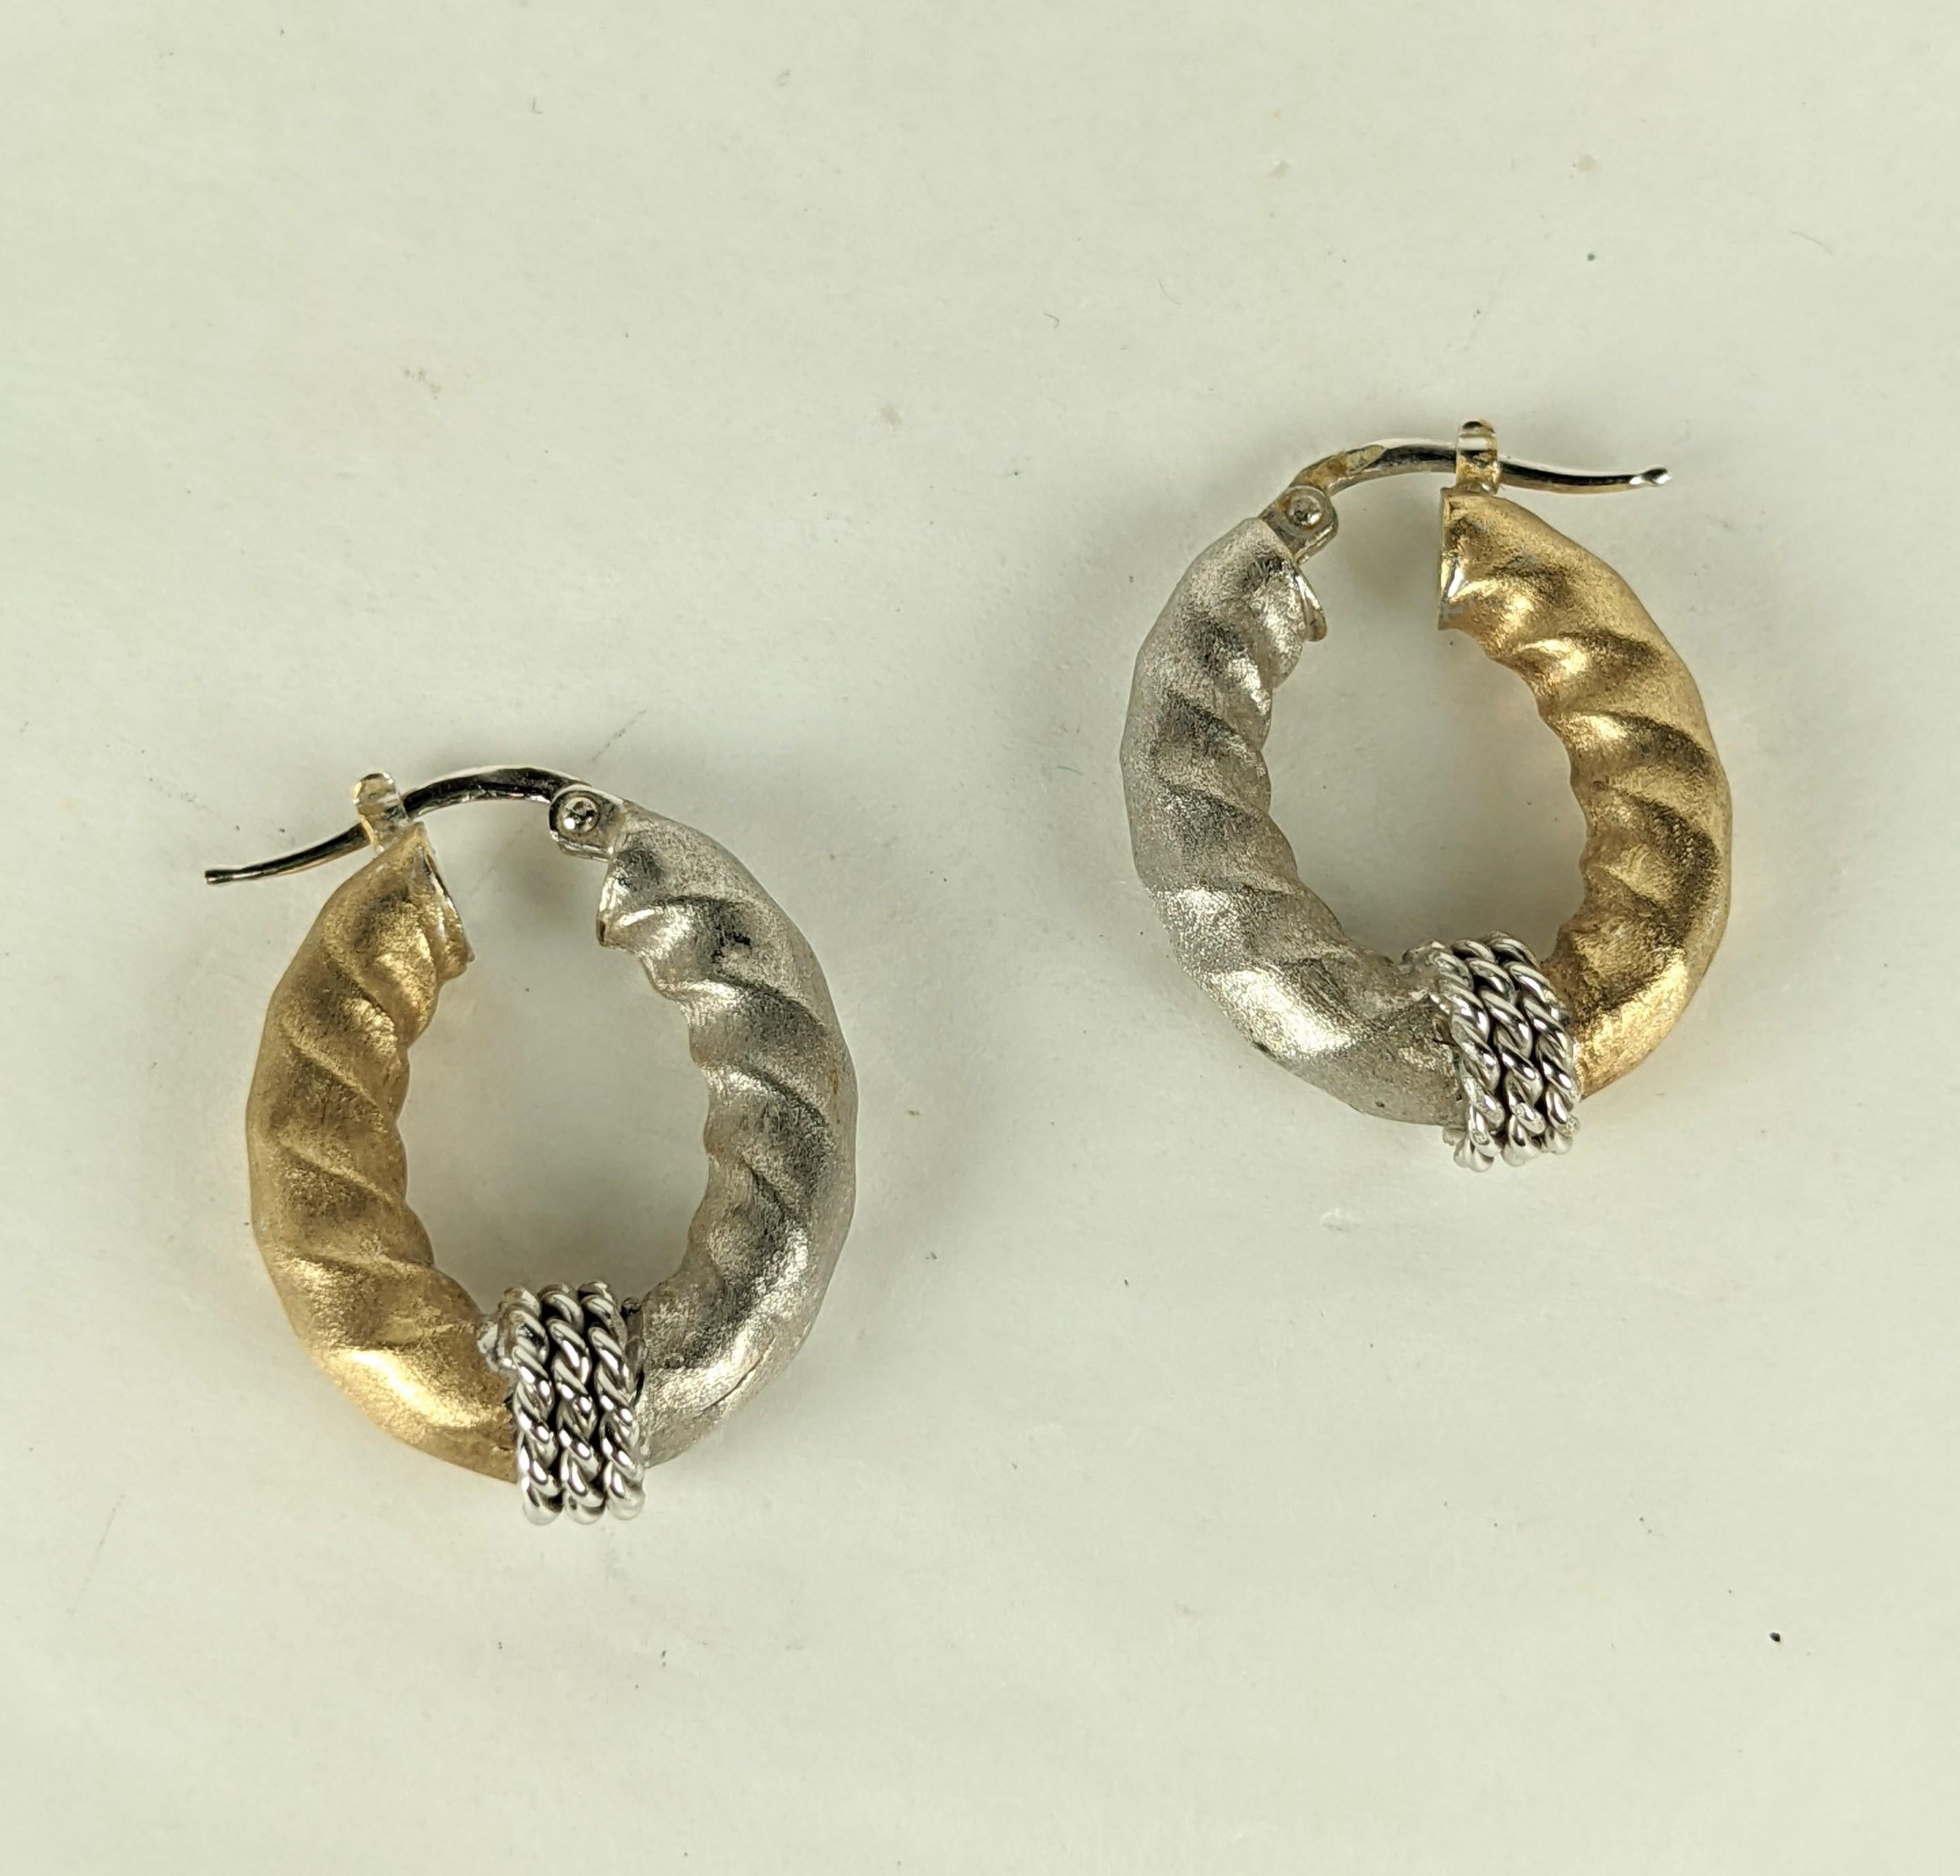 Attractive 2 Toned Satin Finish Gold Hoops in 14k gold with pierced fittings. Twisted hoop design with white and yellow gold in stain finish with chain detailing. 
Marked 14k Italy. 1